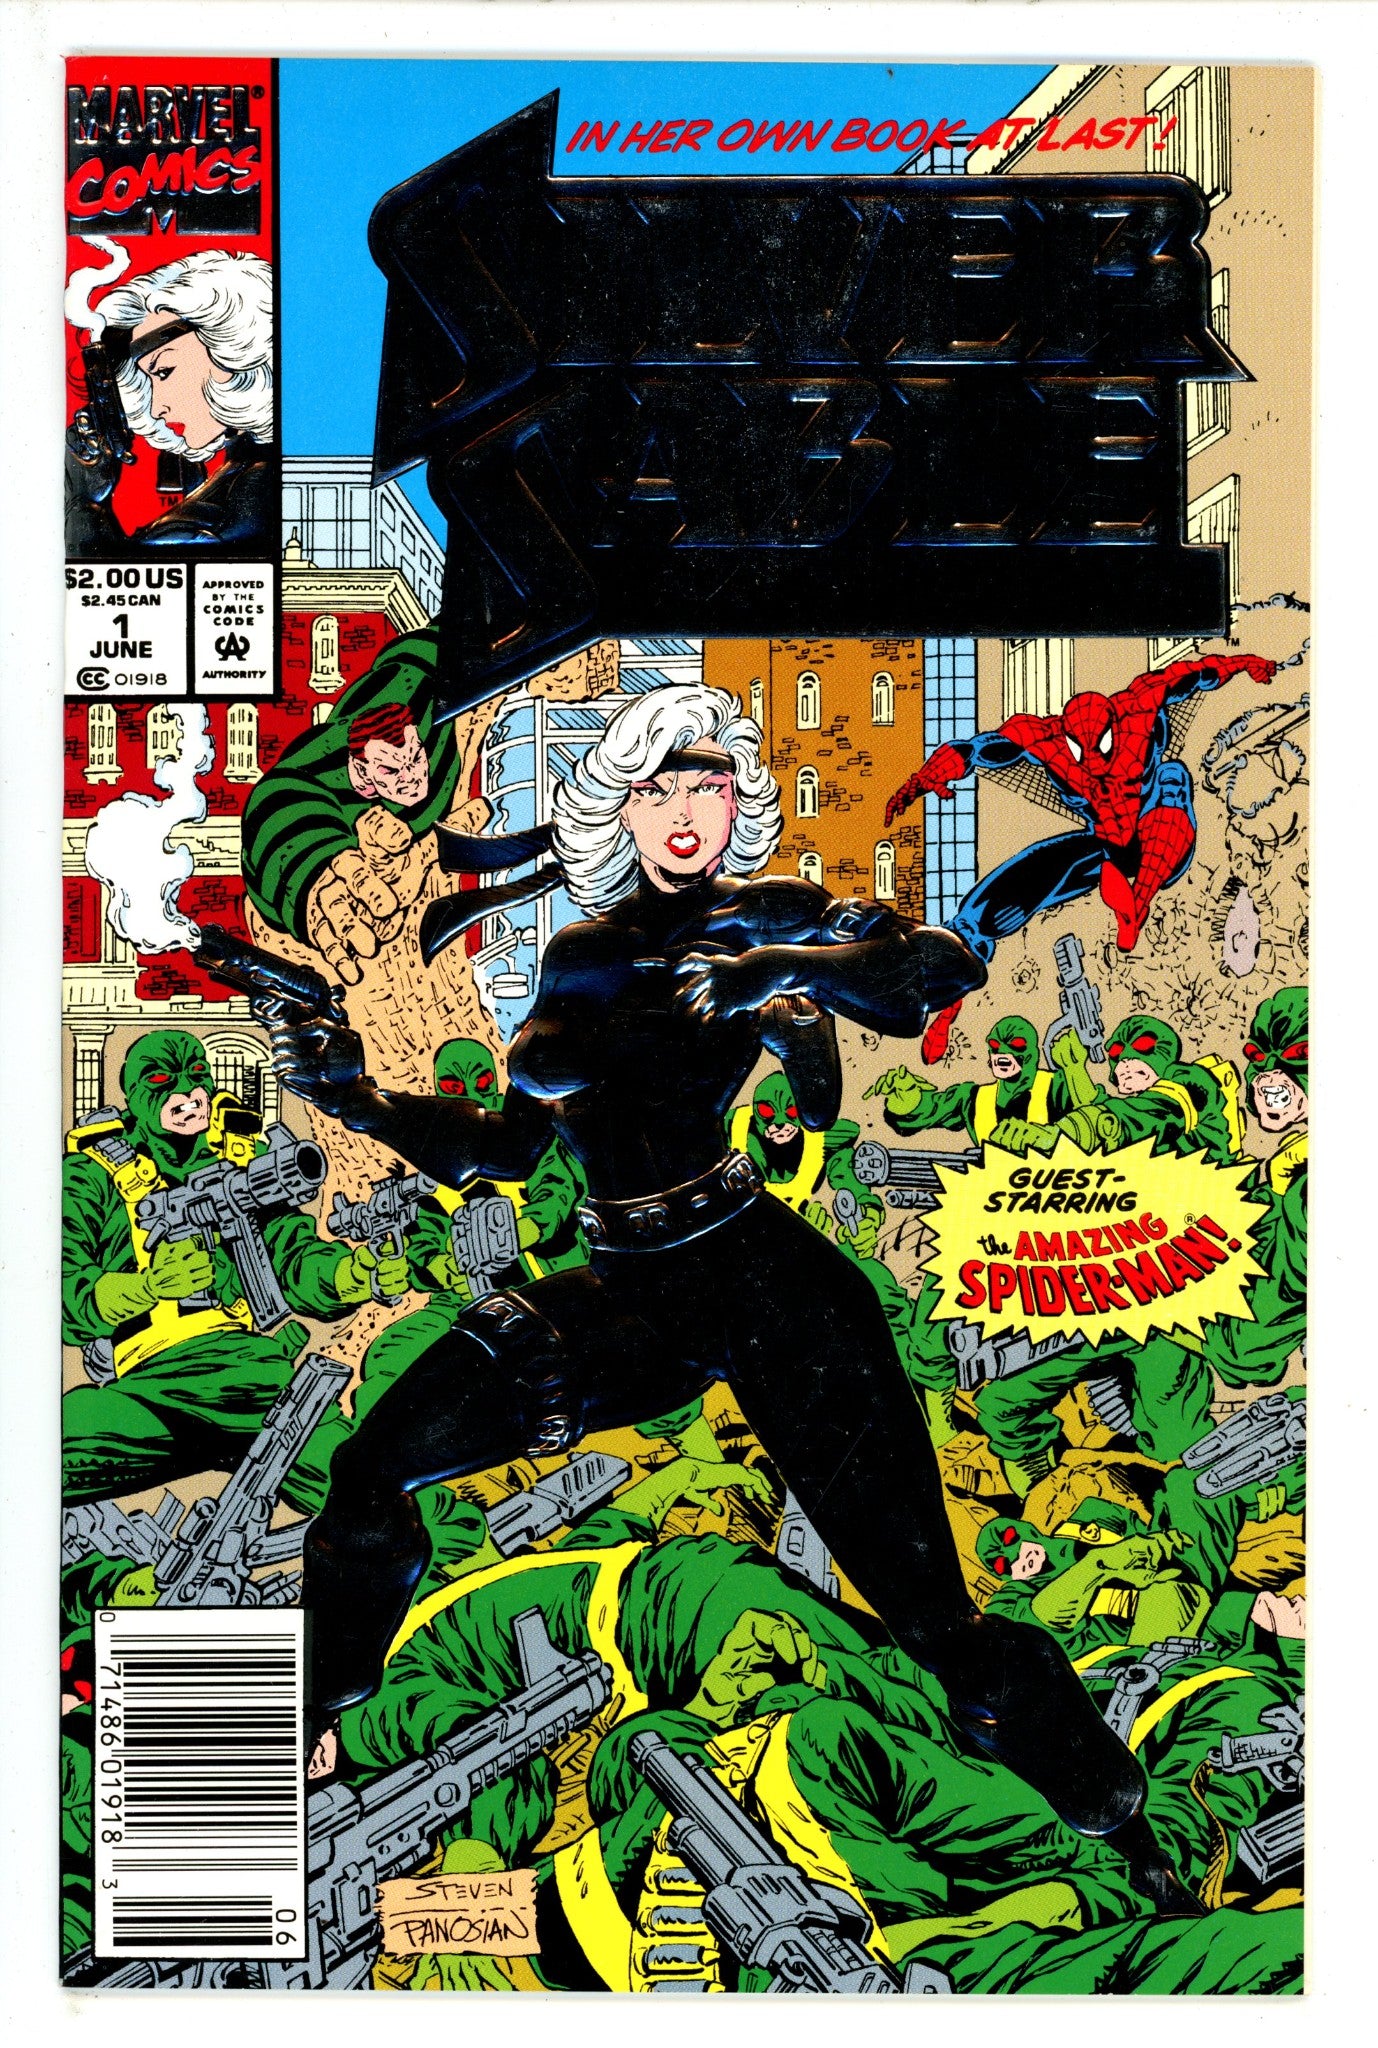 Silver Sable and the Wild Pack 1 Newsstand VF- (1992)